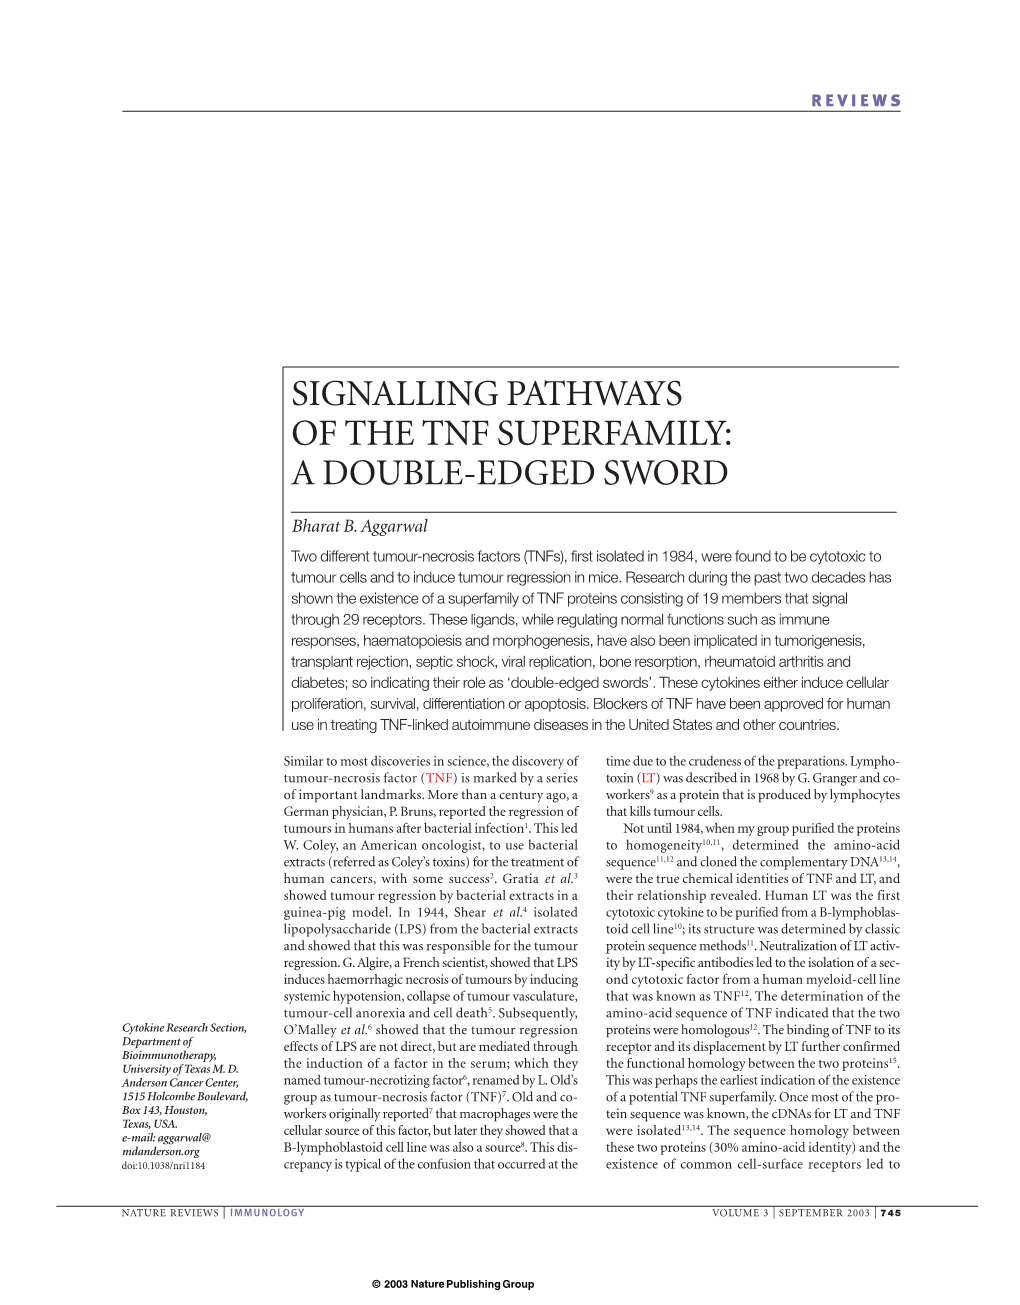 Signalling Pathways of the Tnf Superfamily: a Double-Edged Sword